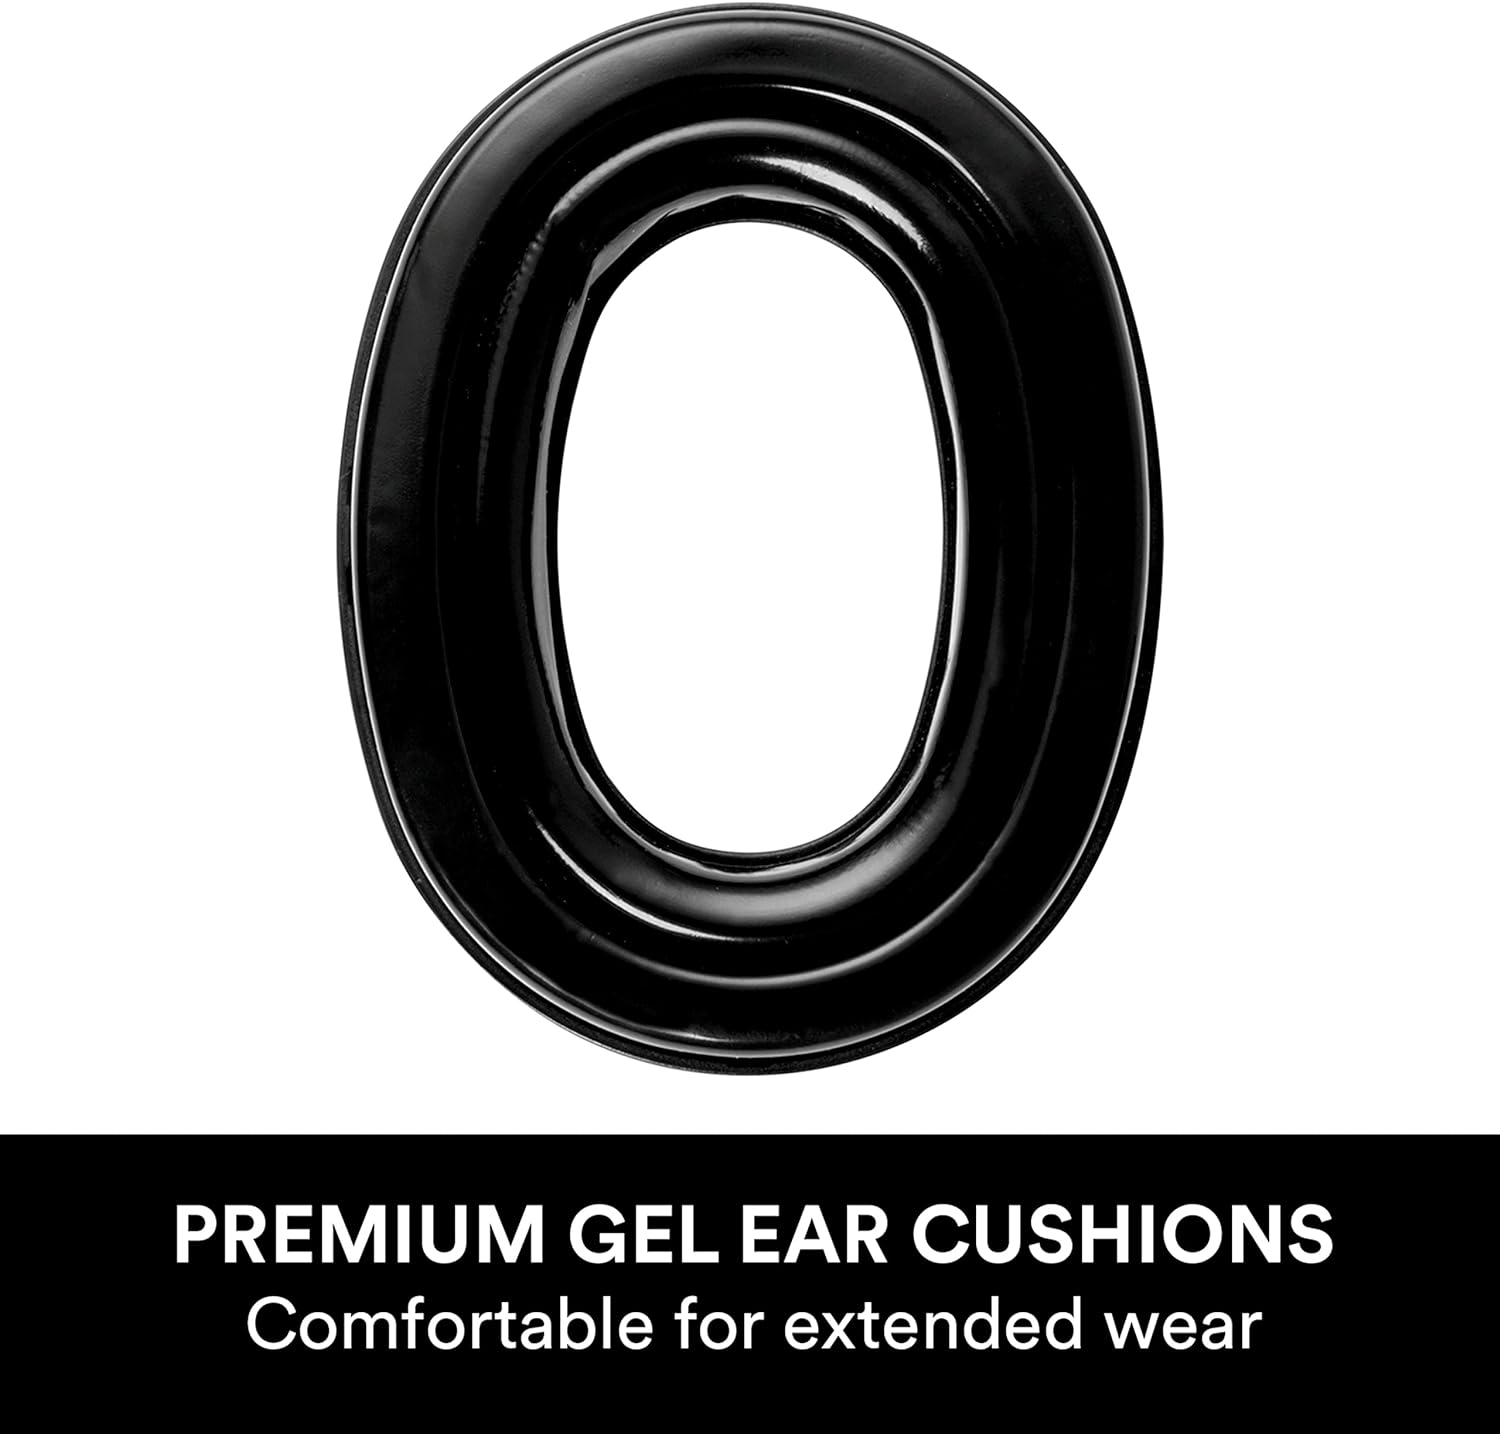 3M WorkTunes Connect + Gel Ear Cushions Hearing Protector with Bluetooth Wireless Technology, NRR 23 dB, Hearing protection for Mowing, Snowblowing, Construction, and Work Shops,Black